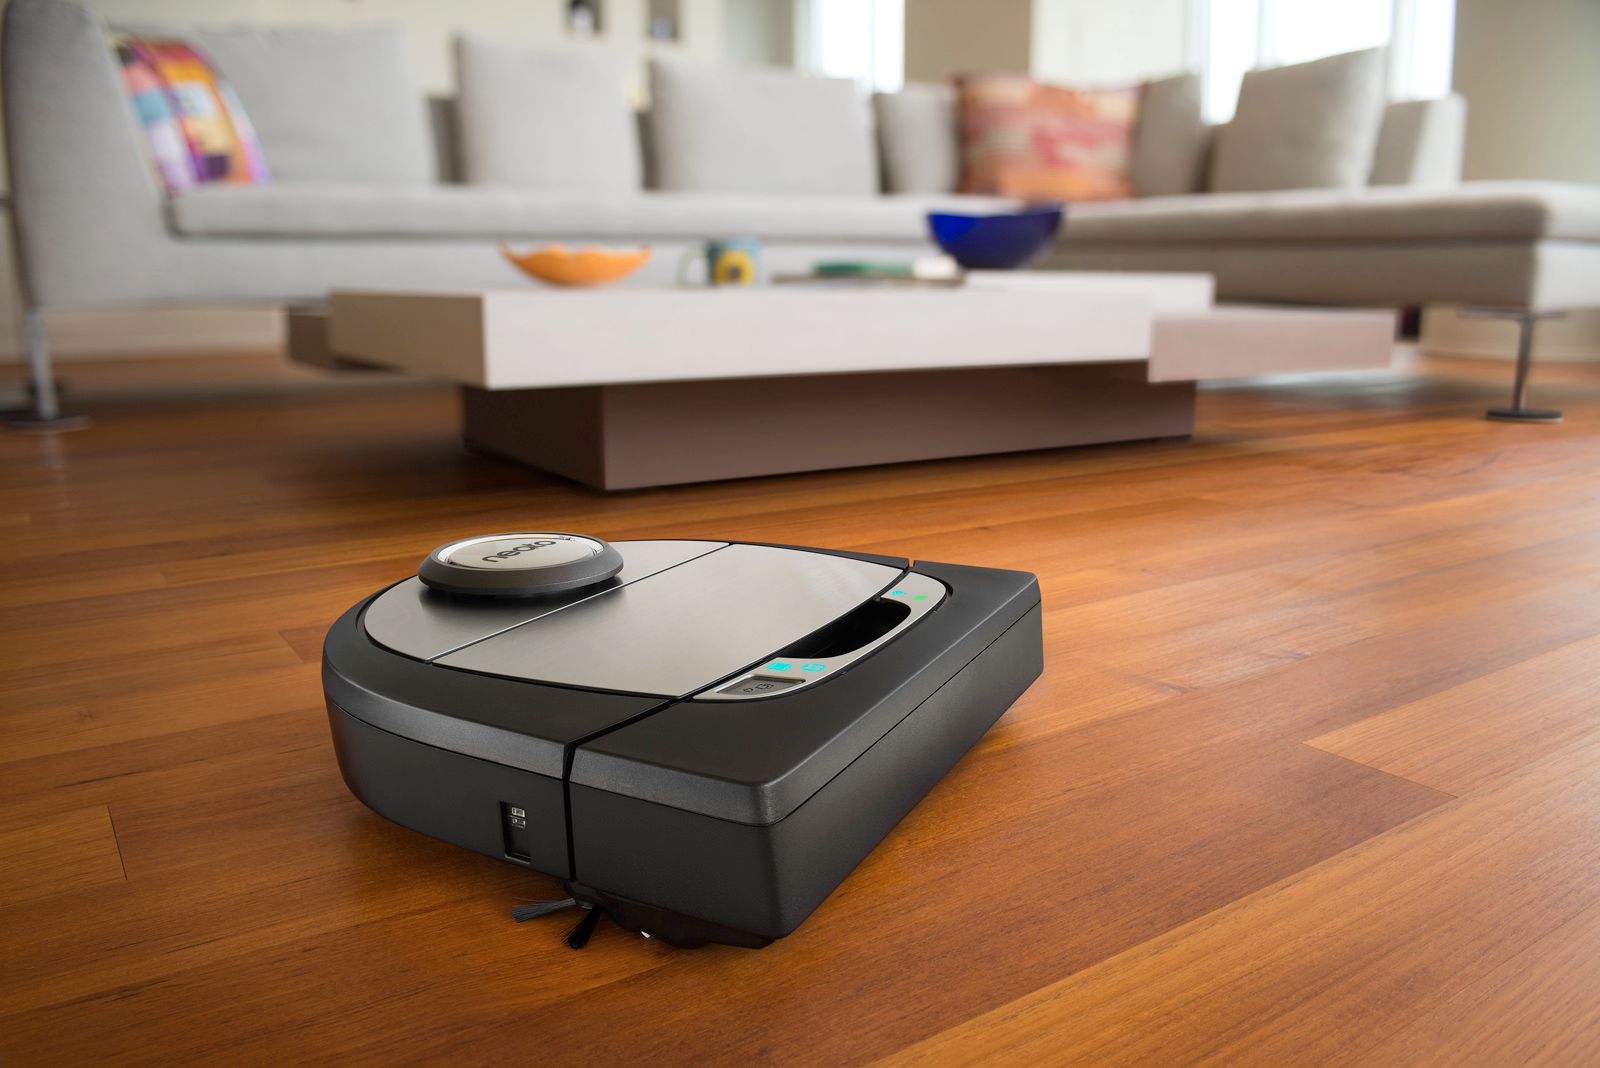 Neato launches D7 Connected its smartest robot cleaner yet with Alexa Google Home and IFTTT compatibility image 1